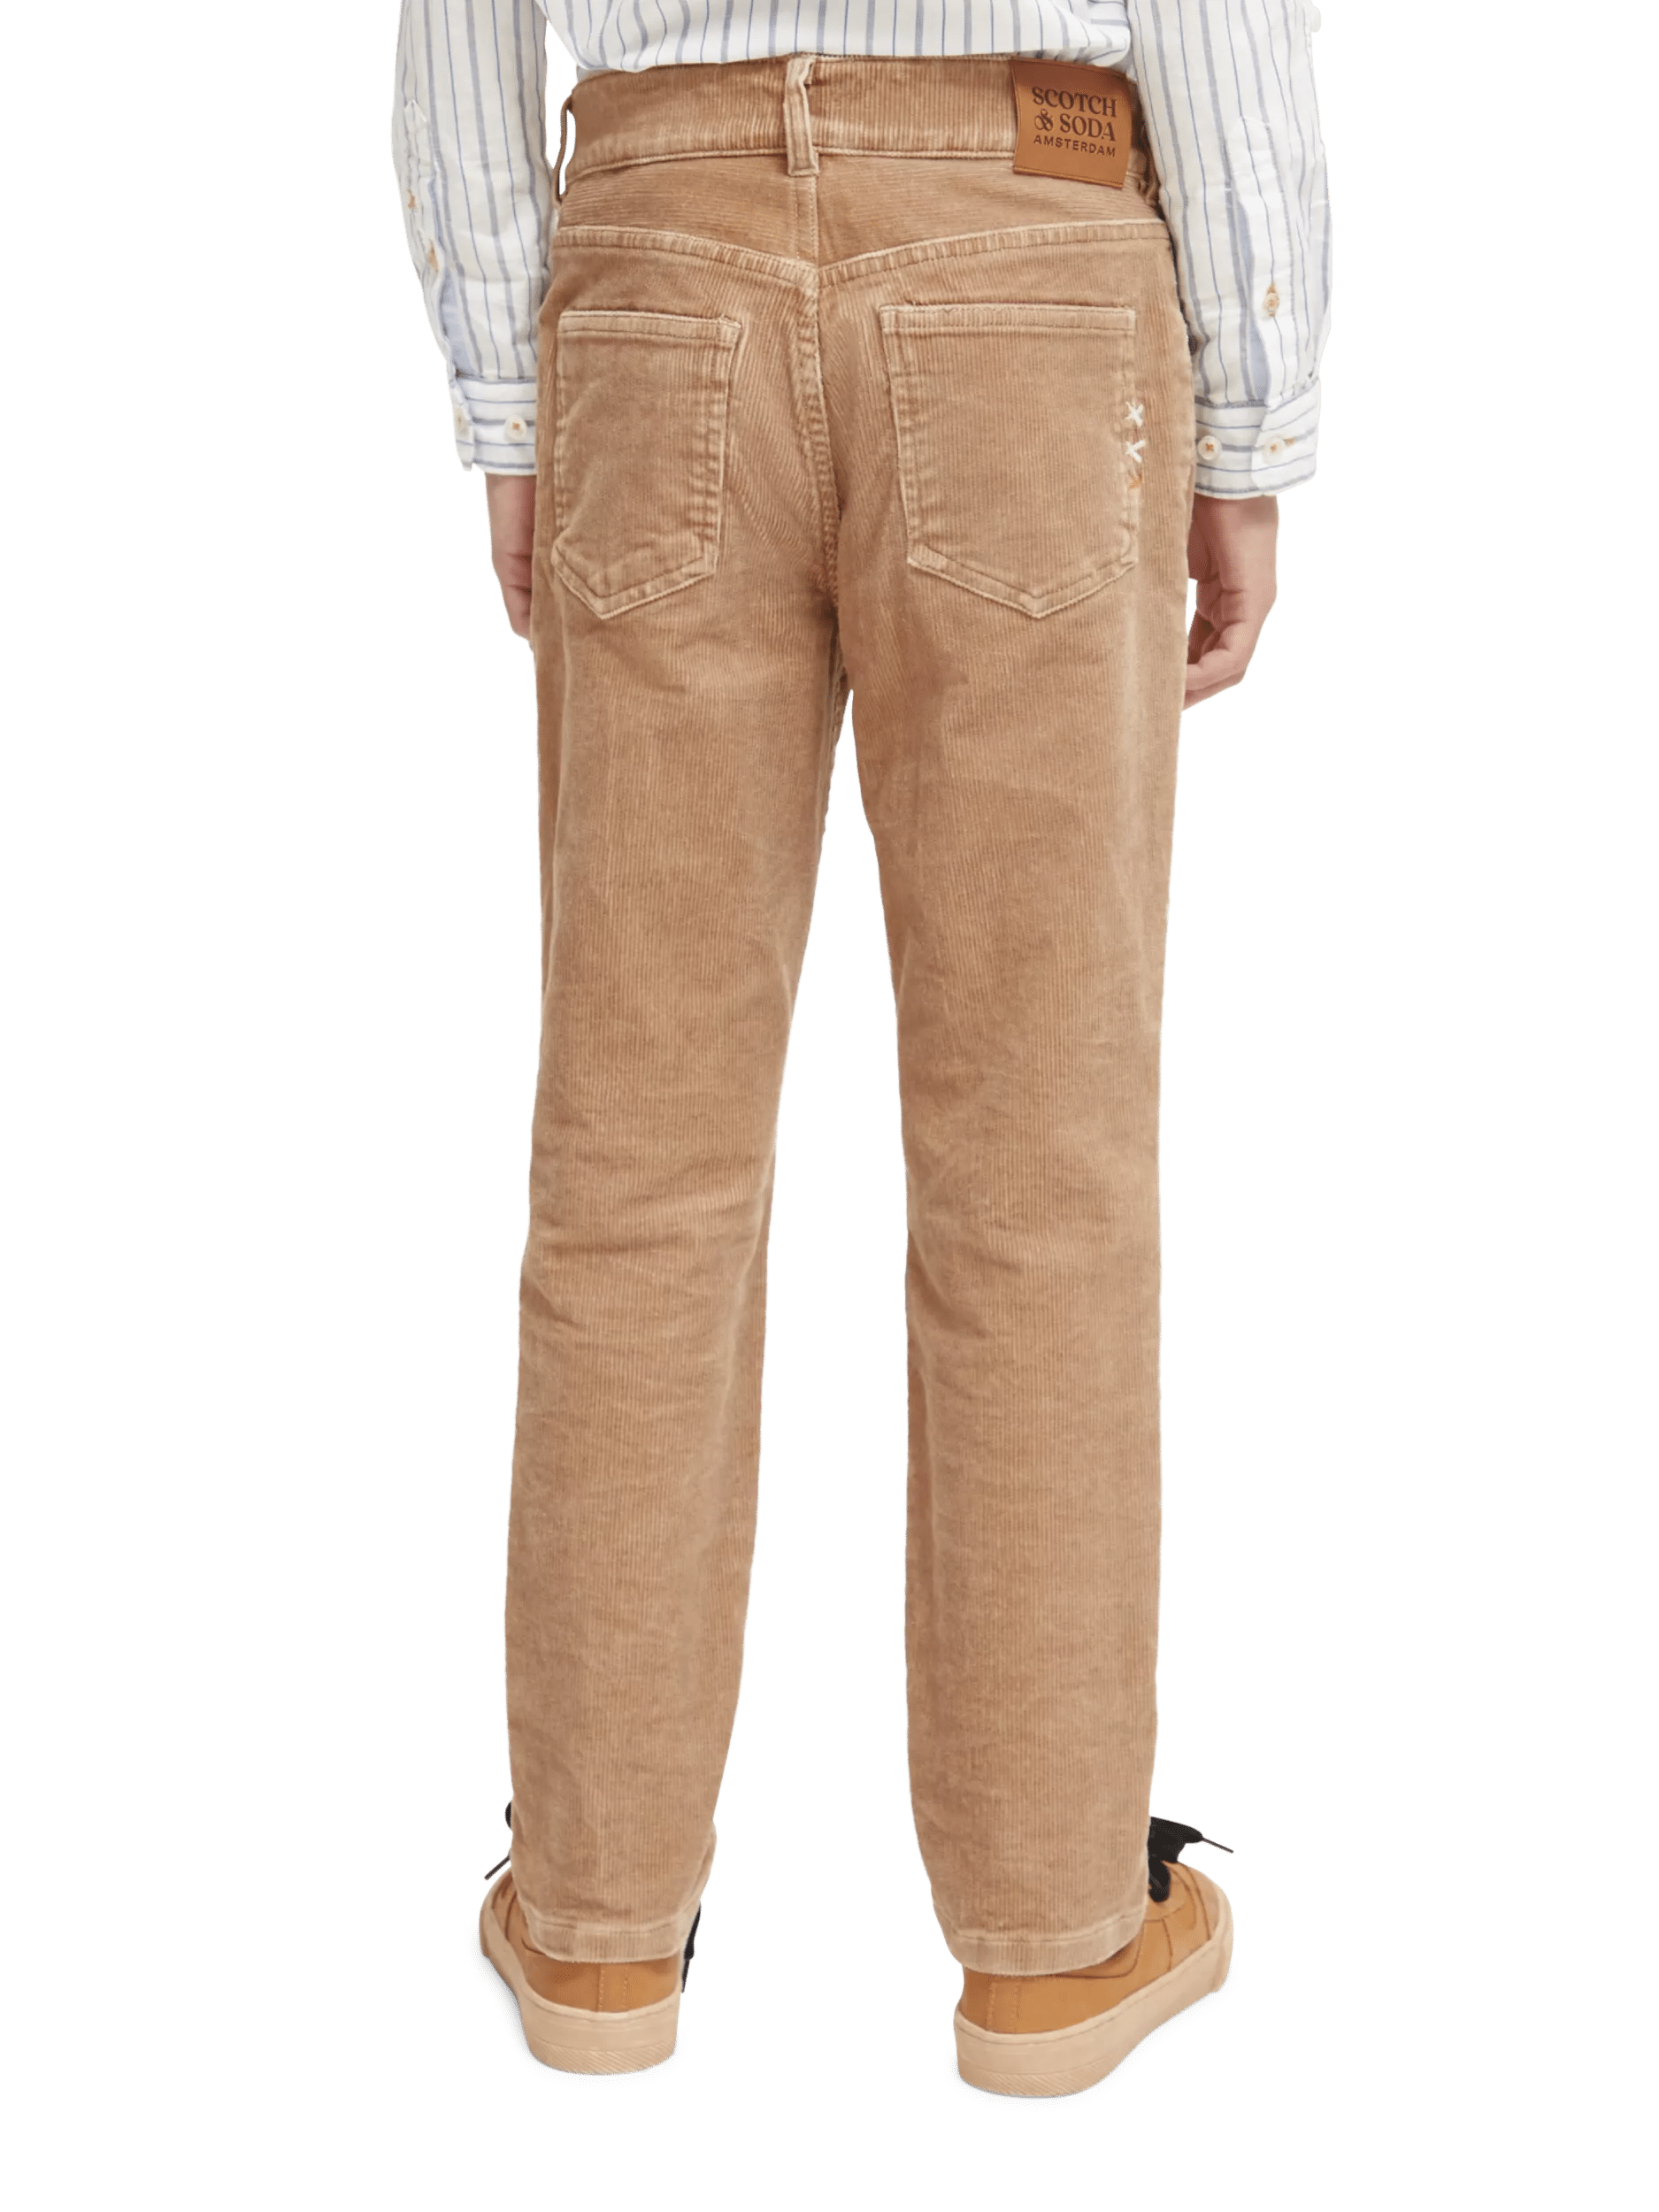 Scotch & Soda Dean loose tapered jeans in corduroy colours MDL-BCK